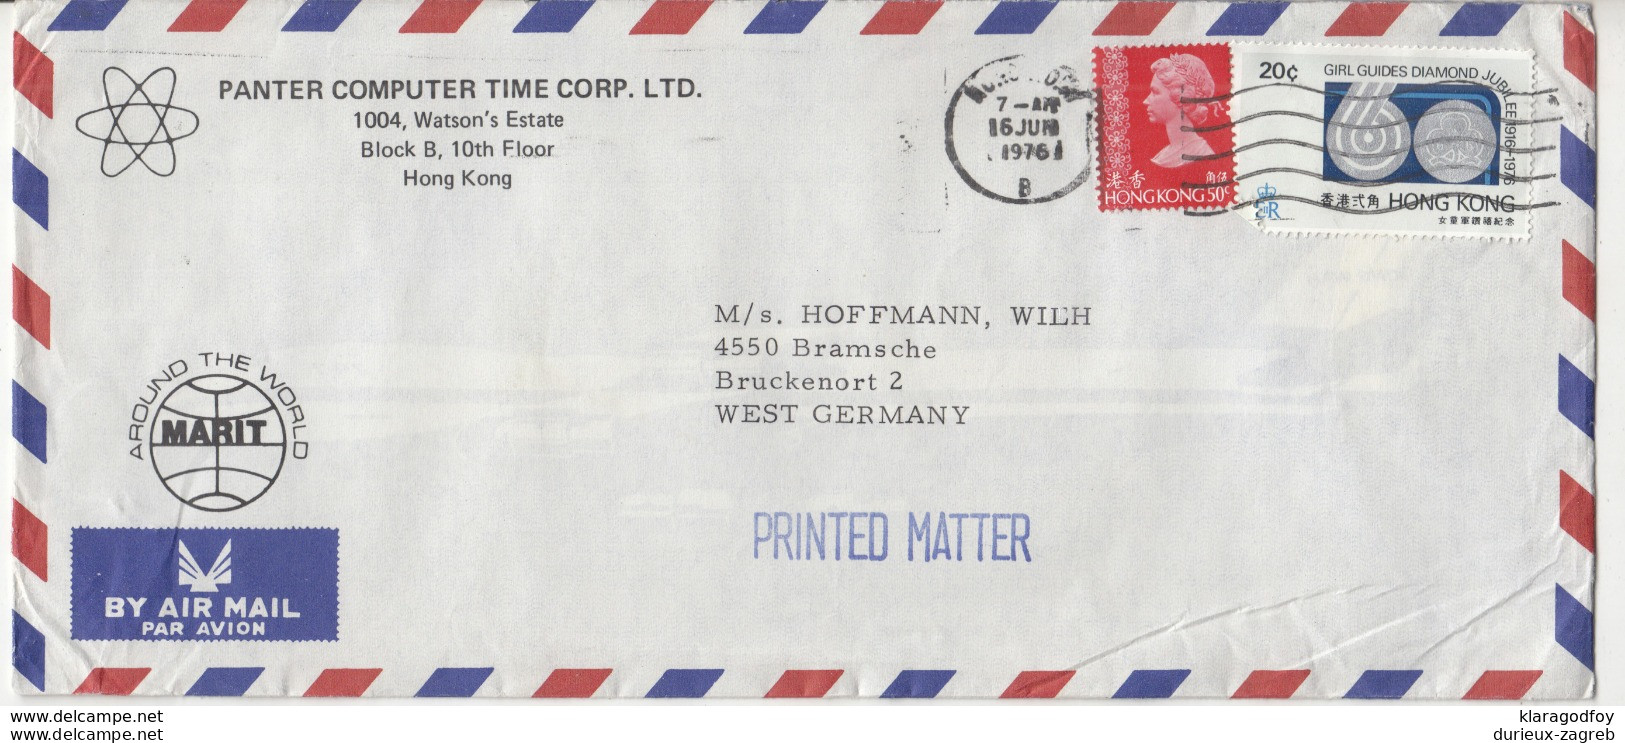 Panter Computer Time Corp. Company Air Mail Letter Cover Travelled 1976 To Germany B190922 - Covers & Documents